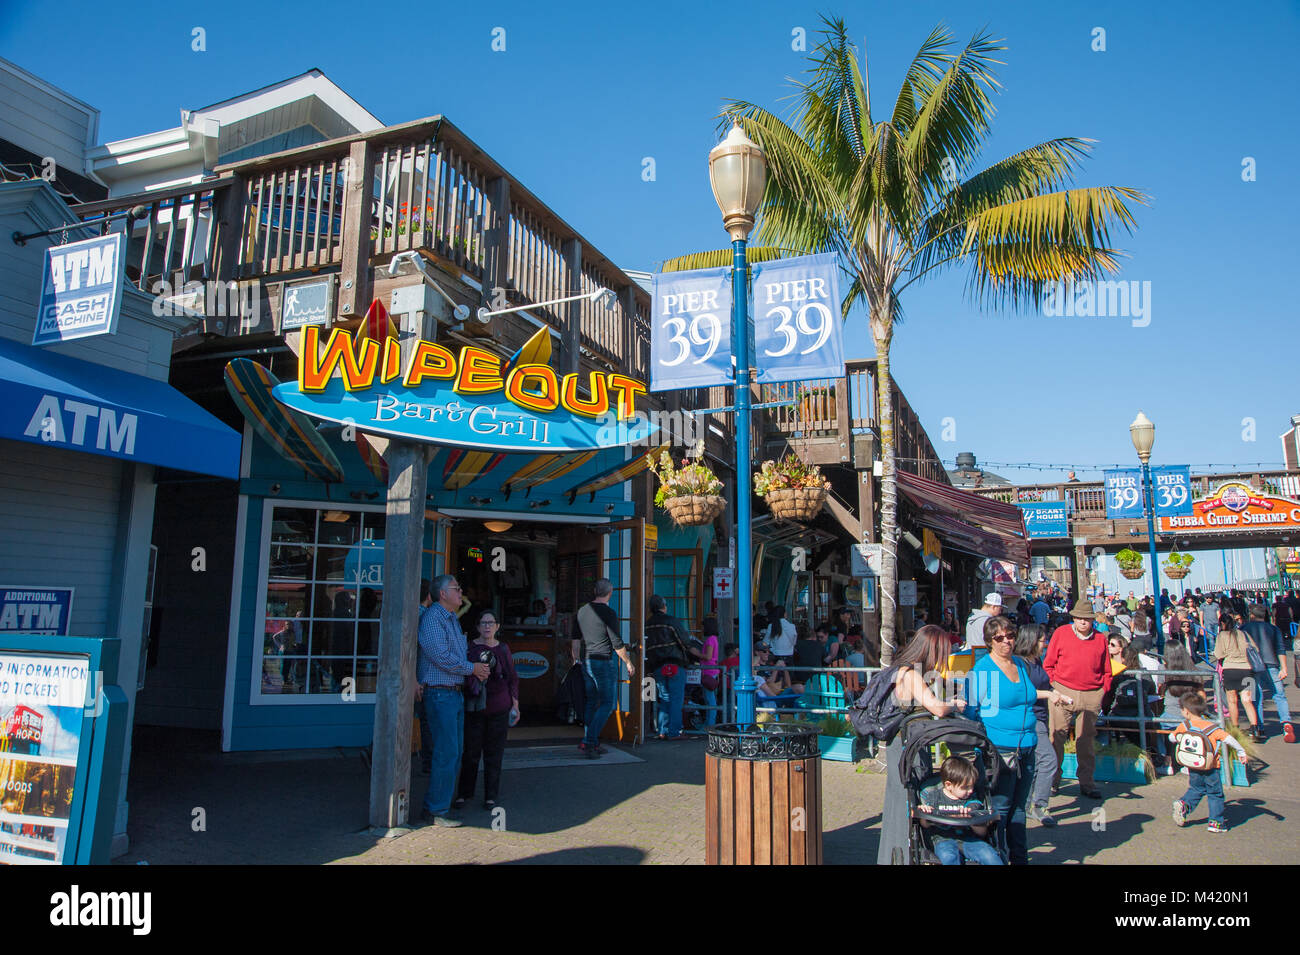 San Francisco, CA - February 03: A popular tourist destination at Pier 39, Wipeout Bar and Grill Stock Photo